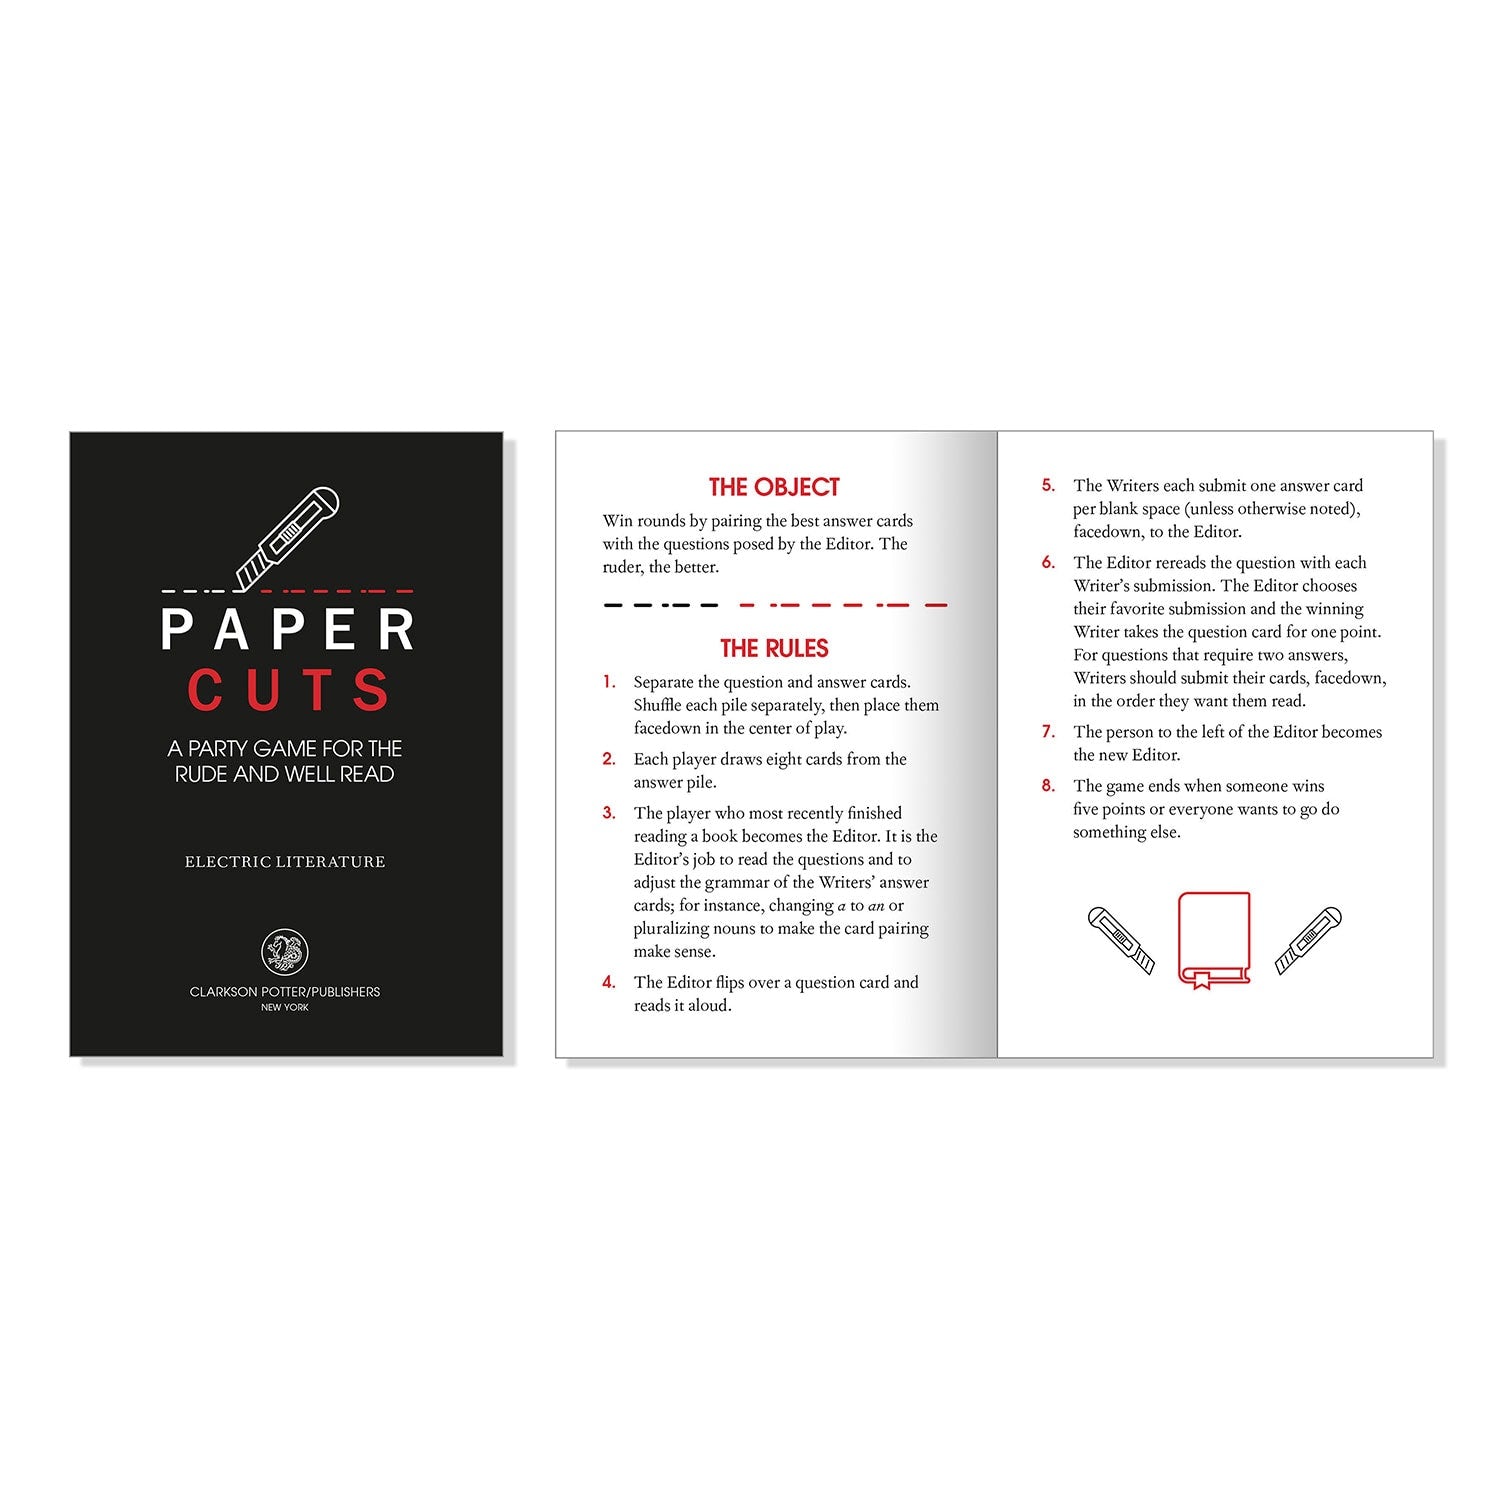 Papercuts: A Party Game for the Rude and Well-Read